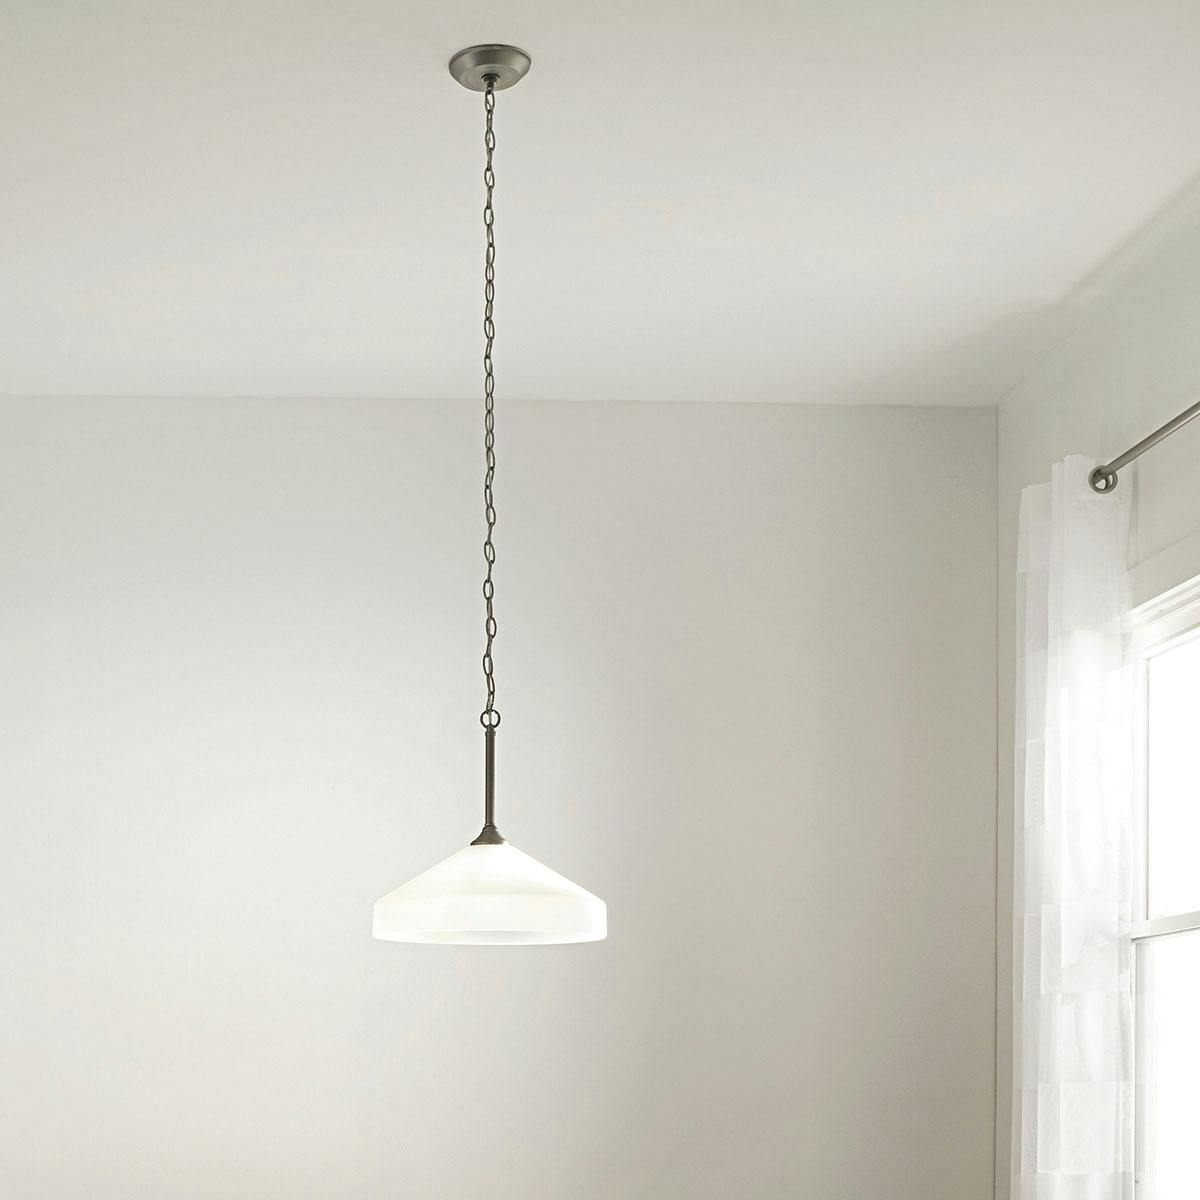 Day time dining room image featuring Ansonia pendant 3349NI